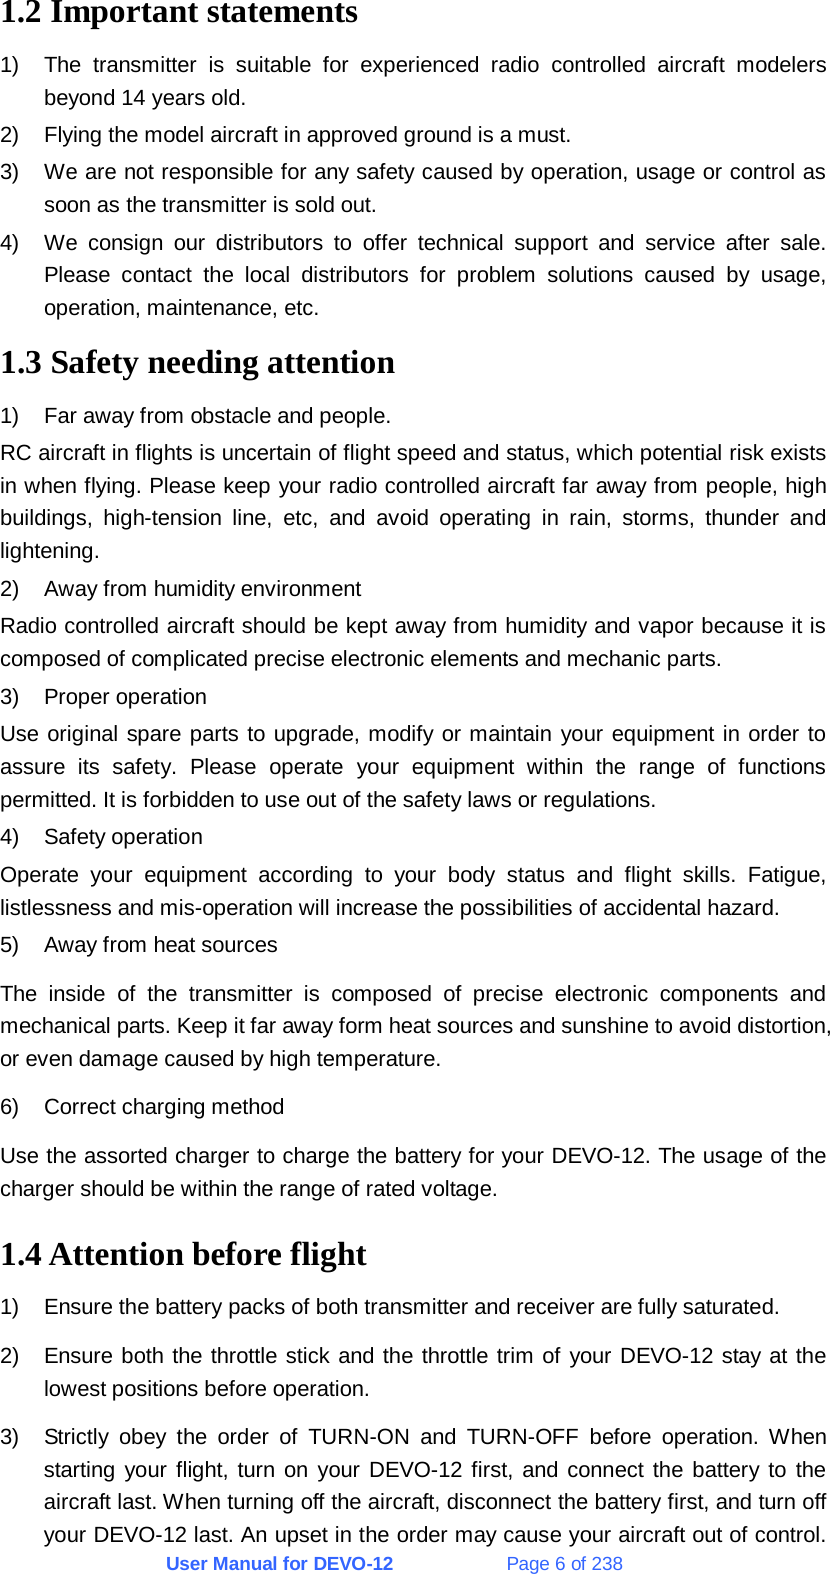 User Manual for DEVO-12             Page 6 of 238 1.2 Important statements 1)  The transmitter is suitable for experienced radio controlled aircraft modelers beyond 14 years old. 2)  Flying the model aircraft in approved ground is a must. 3)  We are not responsible for any safety caused by operation, usage or control as soon as the transmitter is sold out. 4)  We consign our distributors to offer technical support and service after sale. Please contact the local distributors for problem solutions caused by usage, operation, maintenance, etc. 1.3 Safety needing attention 1)  Far away from obstacle and people. RC aircraft in flights is uncertain of flight speed and status, which potential risk exists in when flying. Please keep your radio controlled aircraft far away from people, high buildings, high-tension line, etc, and avoid operating in rain, storms, thunder and lightening. 2)  Away from humidity environment Radio controlled aircraft should be kept away from humidity and vapor because it is composed of complicated precise electronic elements and mechanic parts. 3) Proper operation Use original spare parts to upgrade, modify or maintain your equipment in order to assure its safety. Please operate your equipment within the range of functions permitted. It is forbidden to use out of the safety laws or regulations. 4) Safety operation Operate your equipment according to your body status and flight skills. Fatigue, listlessness and mis-operation will increase the possibilities of accidental hazard. 5)  Away from heat sources The inside of the transmitter is composed of precise electronic components and mechanical parts. Keep it far away form heat sources and sunshine to avoid distortion, or even damage caused by high temperature. 6) Correct charging method Use the assorted charger to charge the battery for your DEVO-12. The usage of the charger should be within the range of rated voltage. 1.4 Attention before flight 1)  Ensure the battery packs of both transmitter and receiver are fully saturated. 2)  Ensure both the throttle stick and the throttle trim of your DEVO-12 stay at the lowest positions before operation. 3)  Strictly obey the order of TURN-ON and TURN-OFF before operation. When starting your flight, turn on your DEVO-12 first, and connect the battery to the aircraft last. When turning off the aircraft, disconnect the battery first, and turn off your DEVO-12 last. An upset in the order may cause your aircraft out of control. 